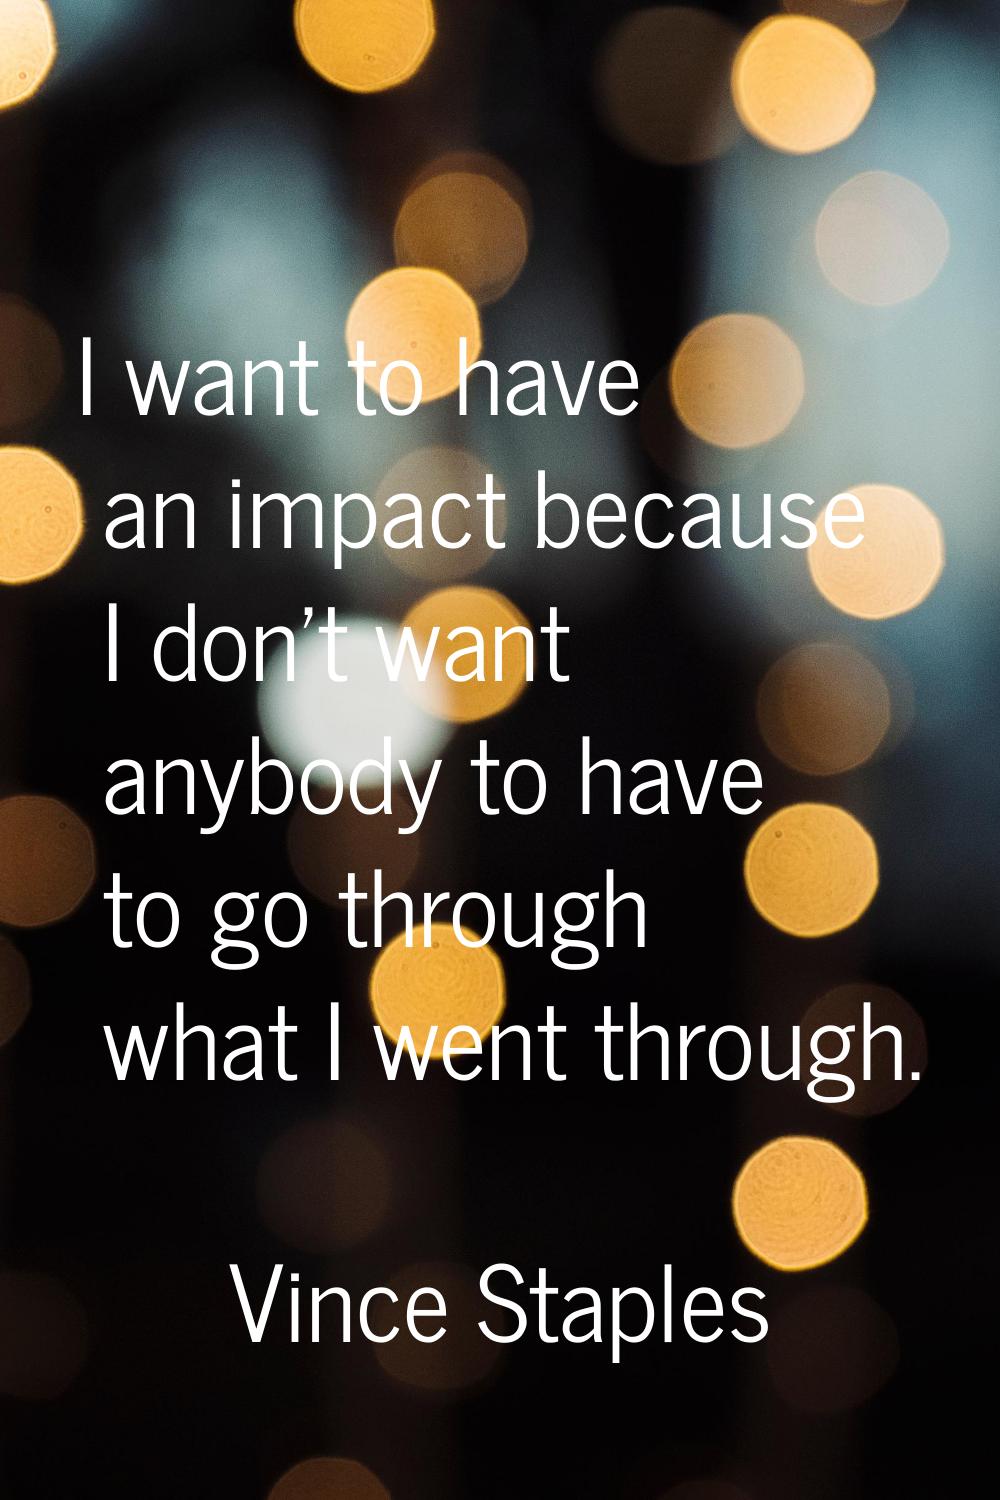 I want to have an impact because I don't want anybody to have to go through what I went through.